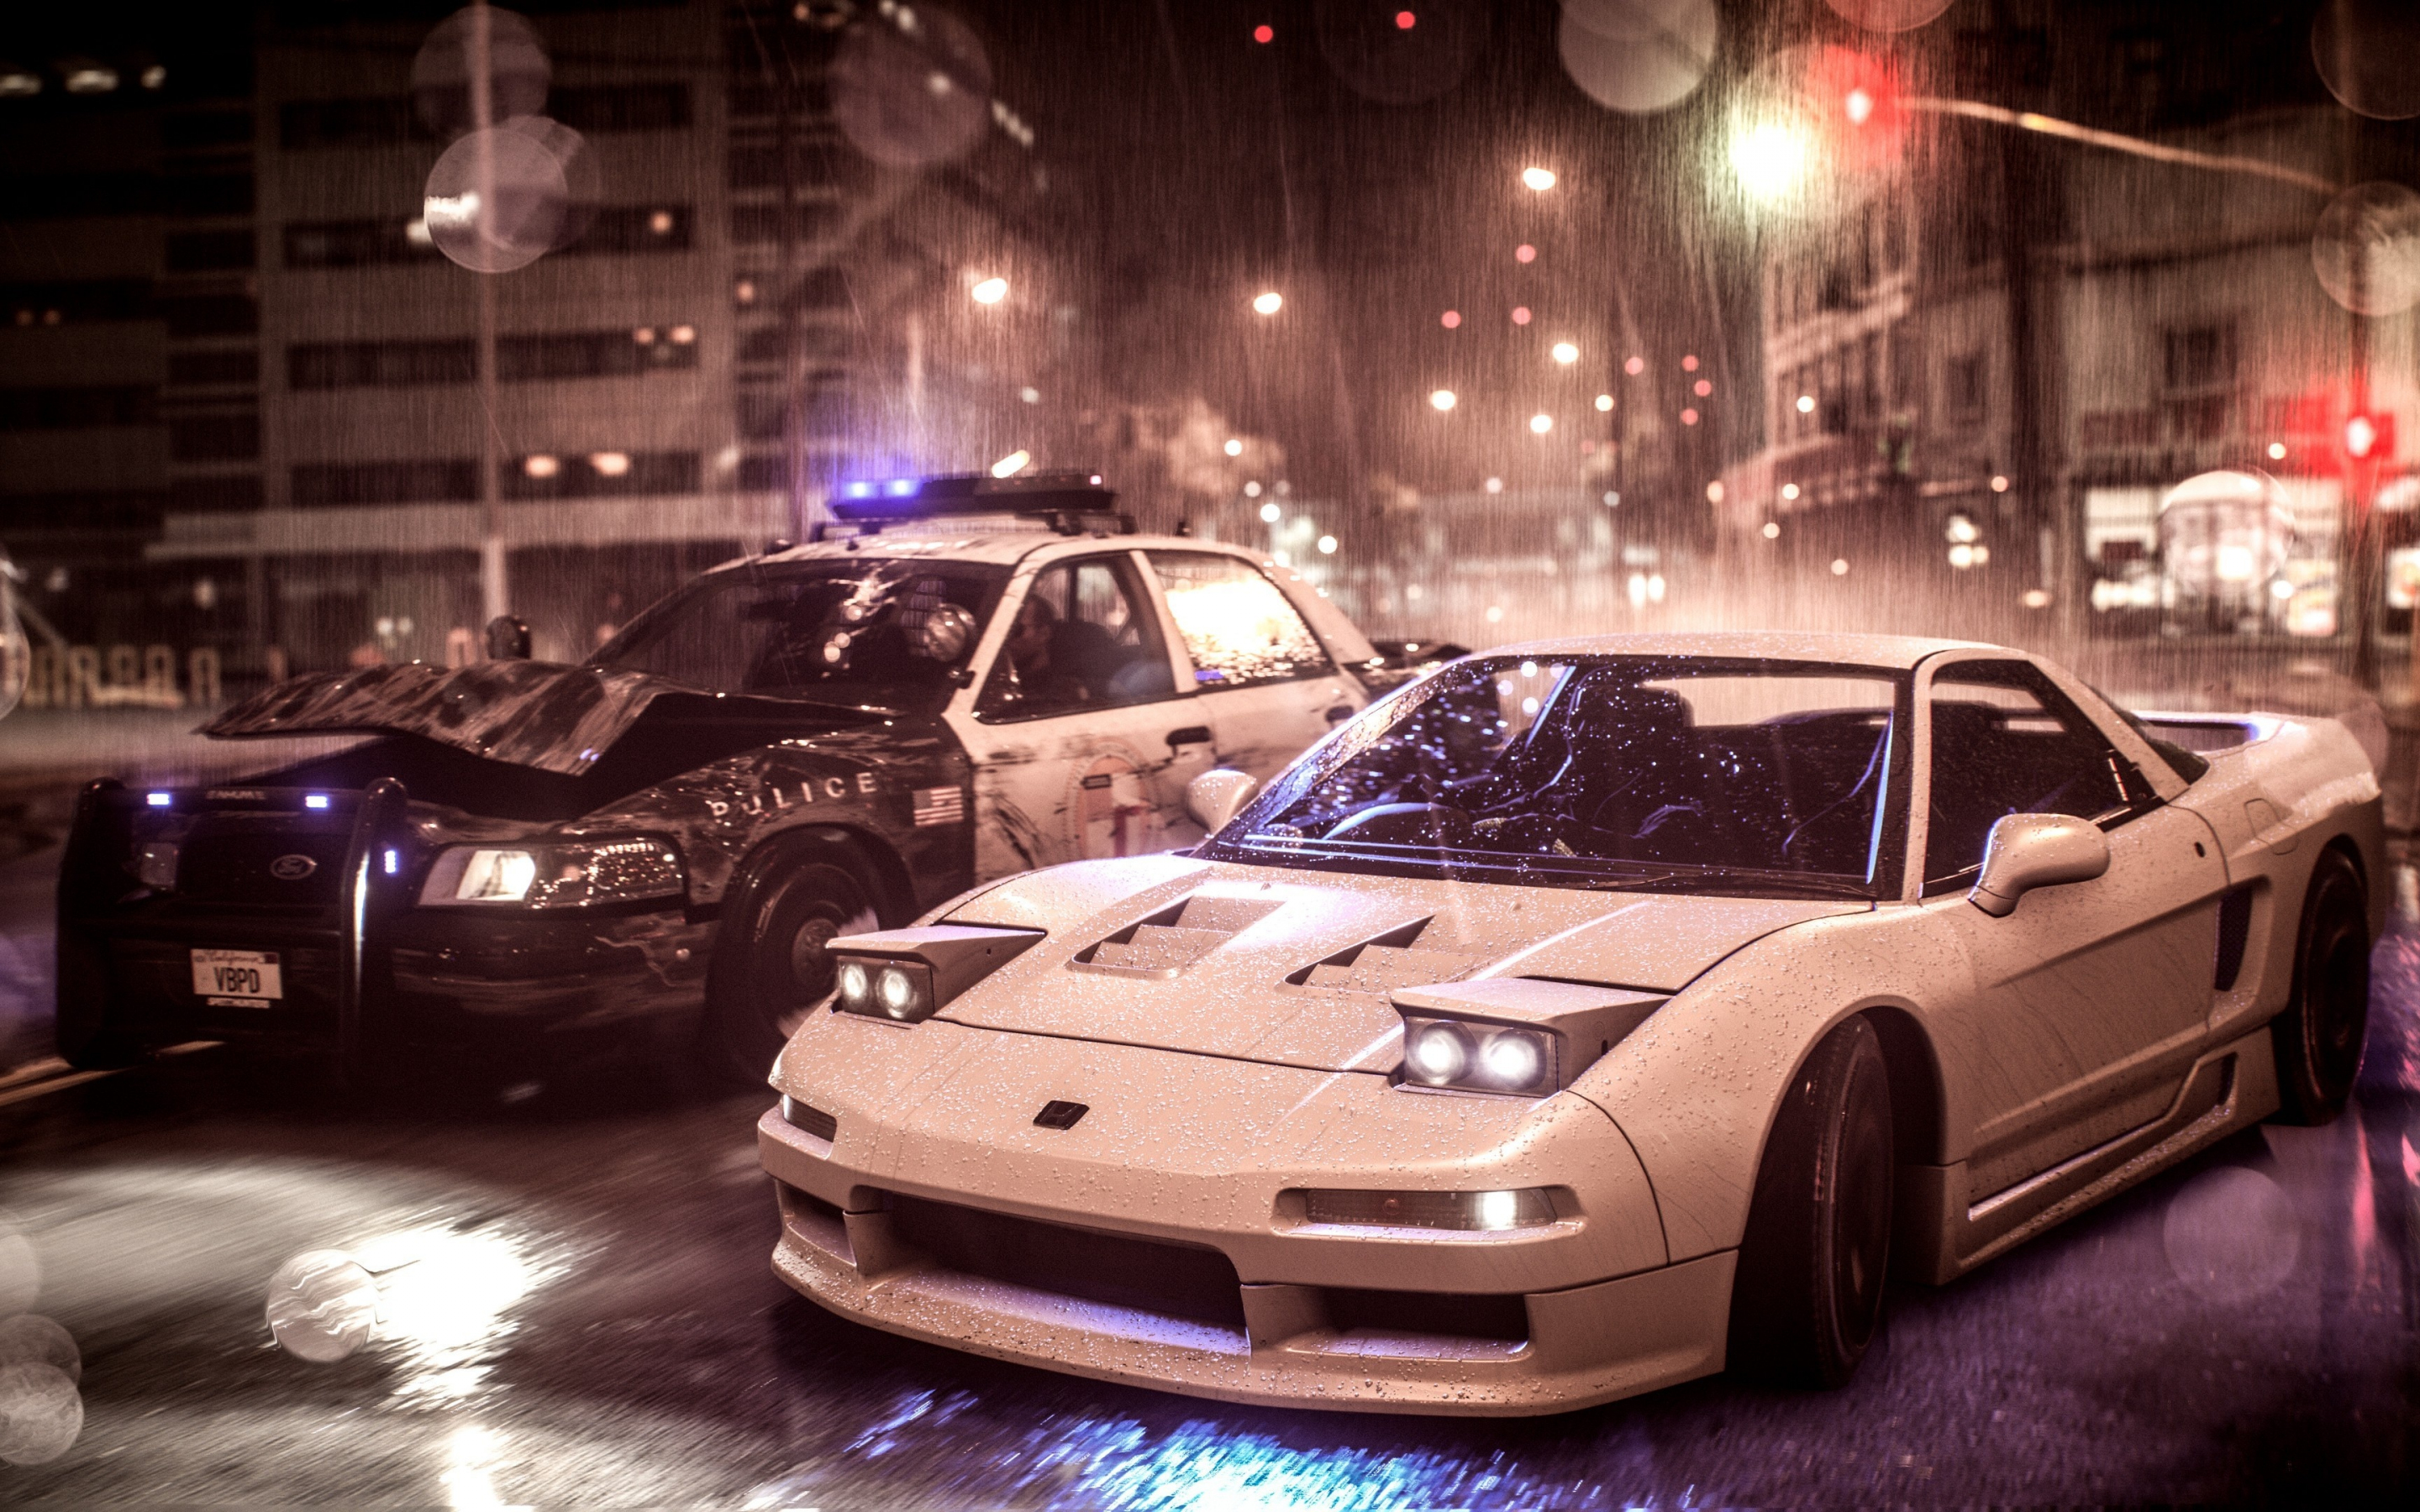 Need for speed, Acura NSX vs police car, 2880x1800 wallpaper